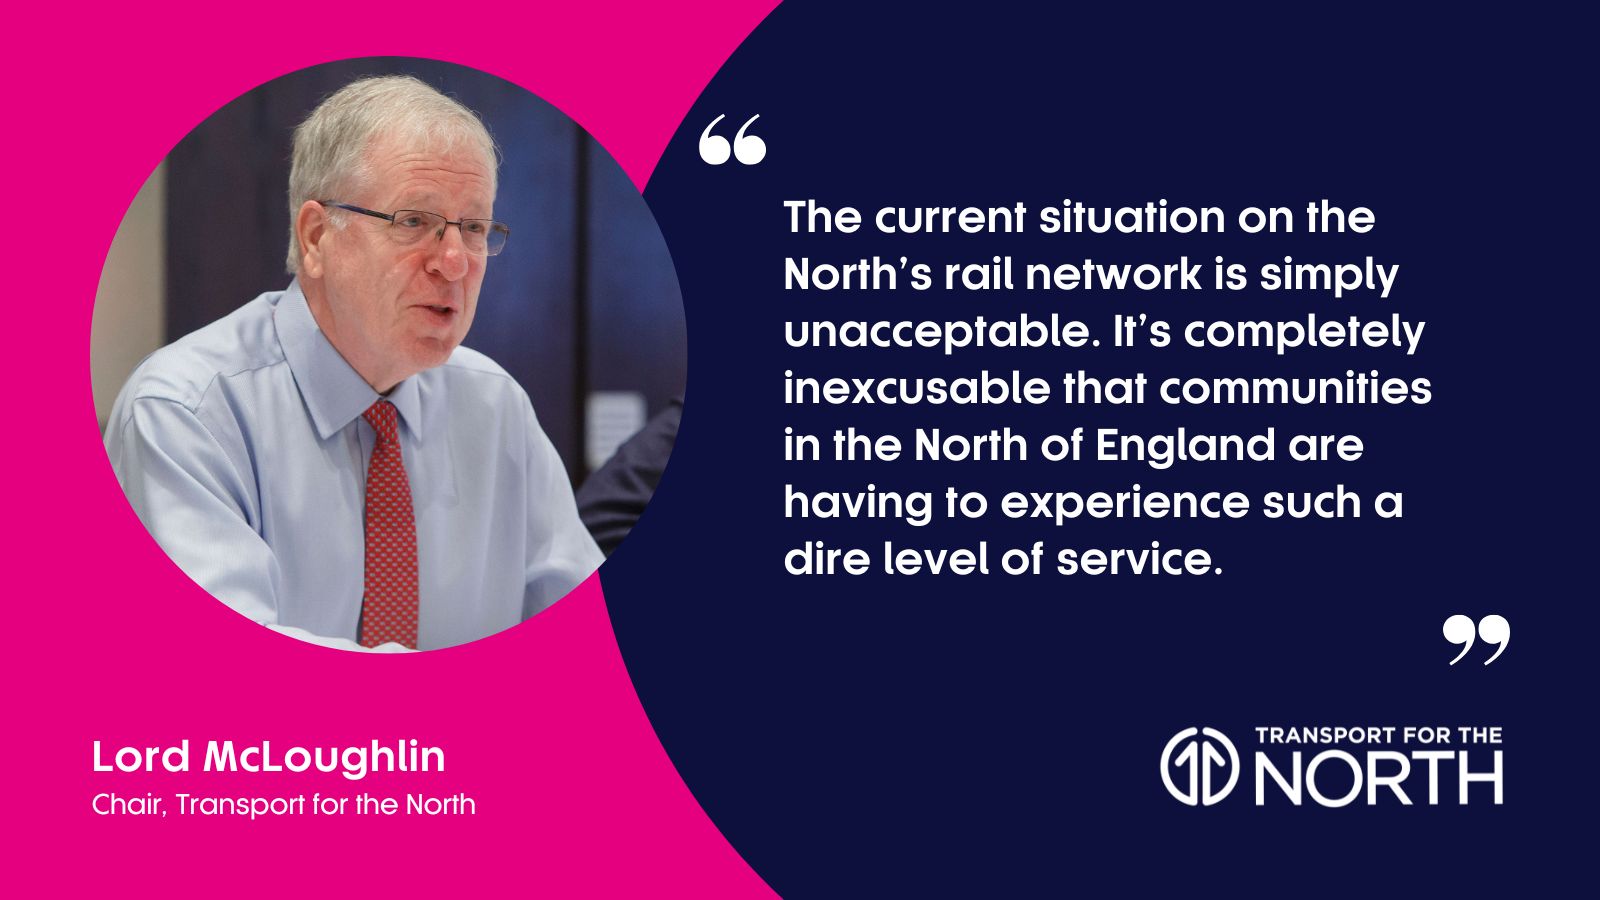 Lord McLoughlin: “The current situation on the North’s rail network is unacceptable”